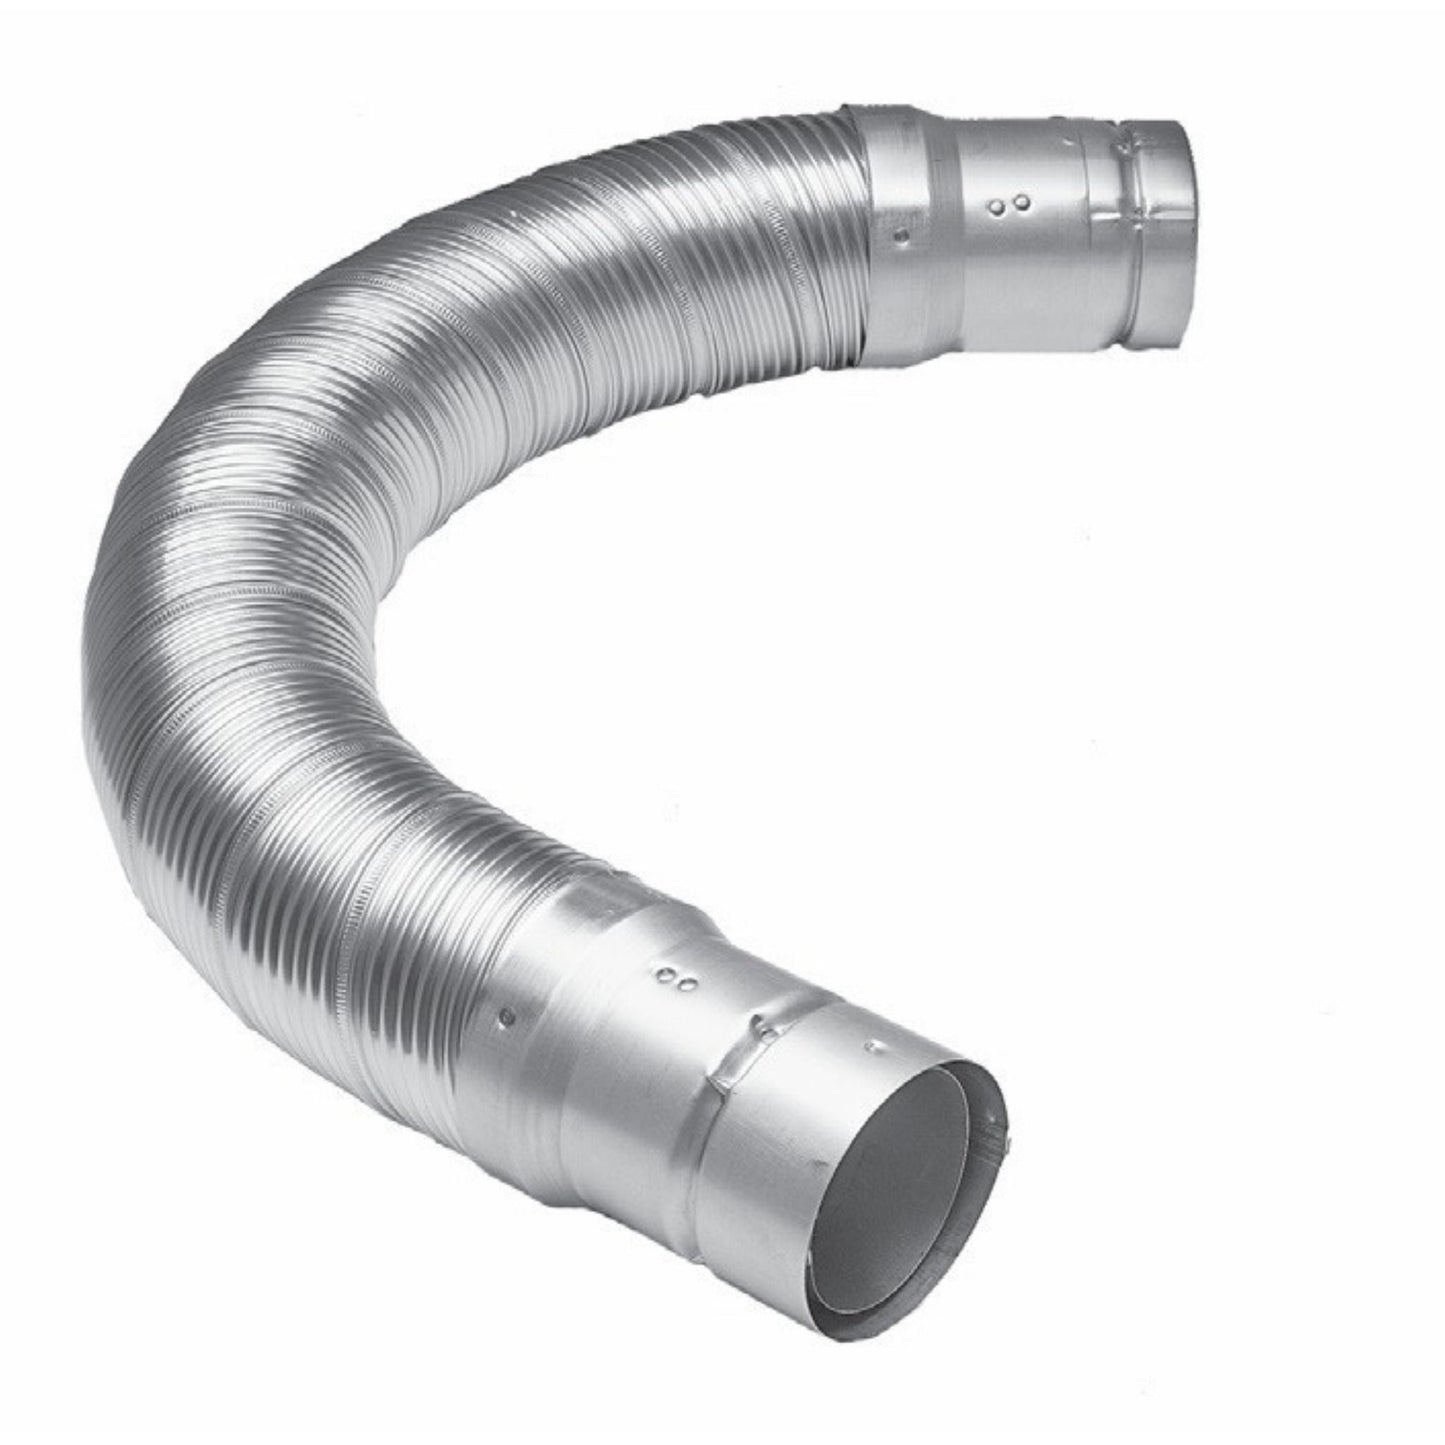 DuraVent DuraConnect II B-Vent 3" x 36" Flexible Double-Wall Gas Vent Connector